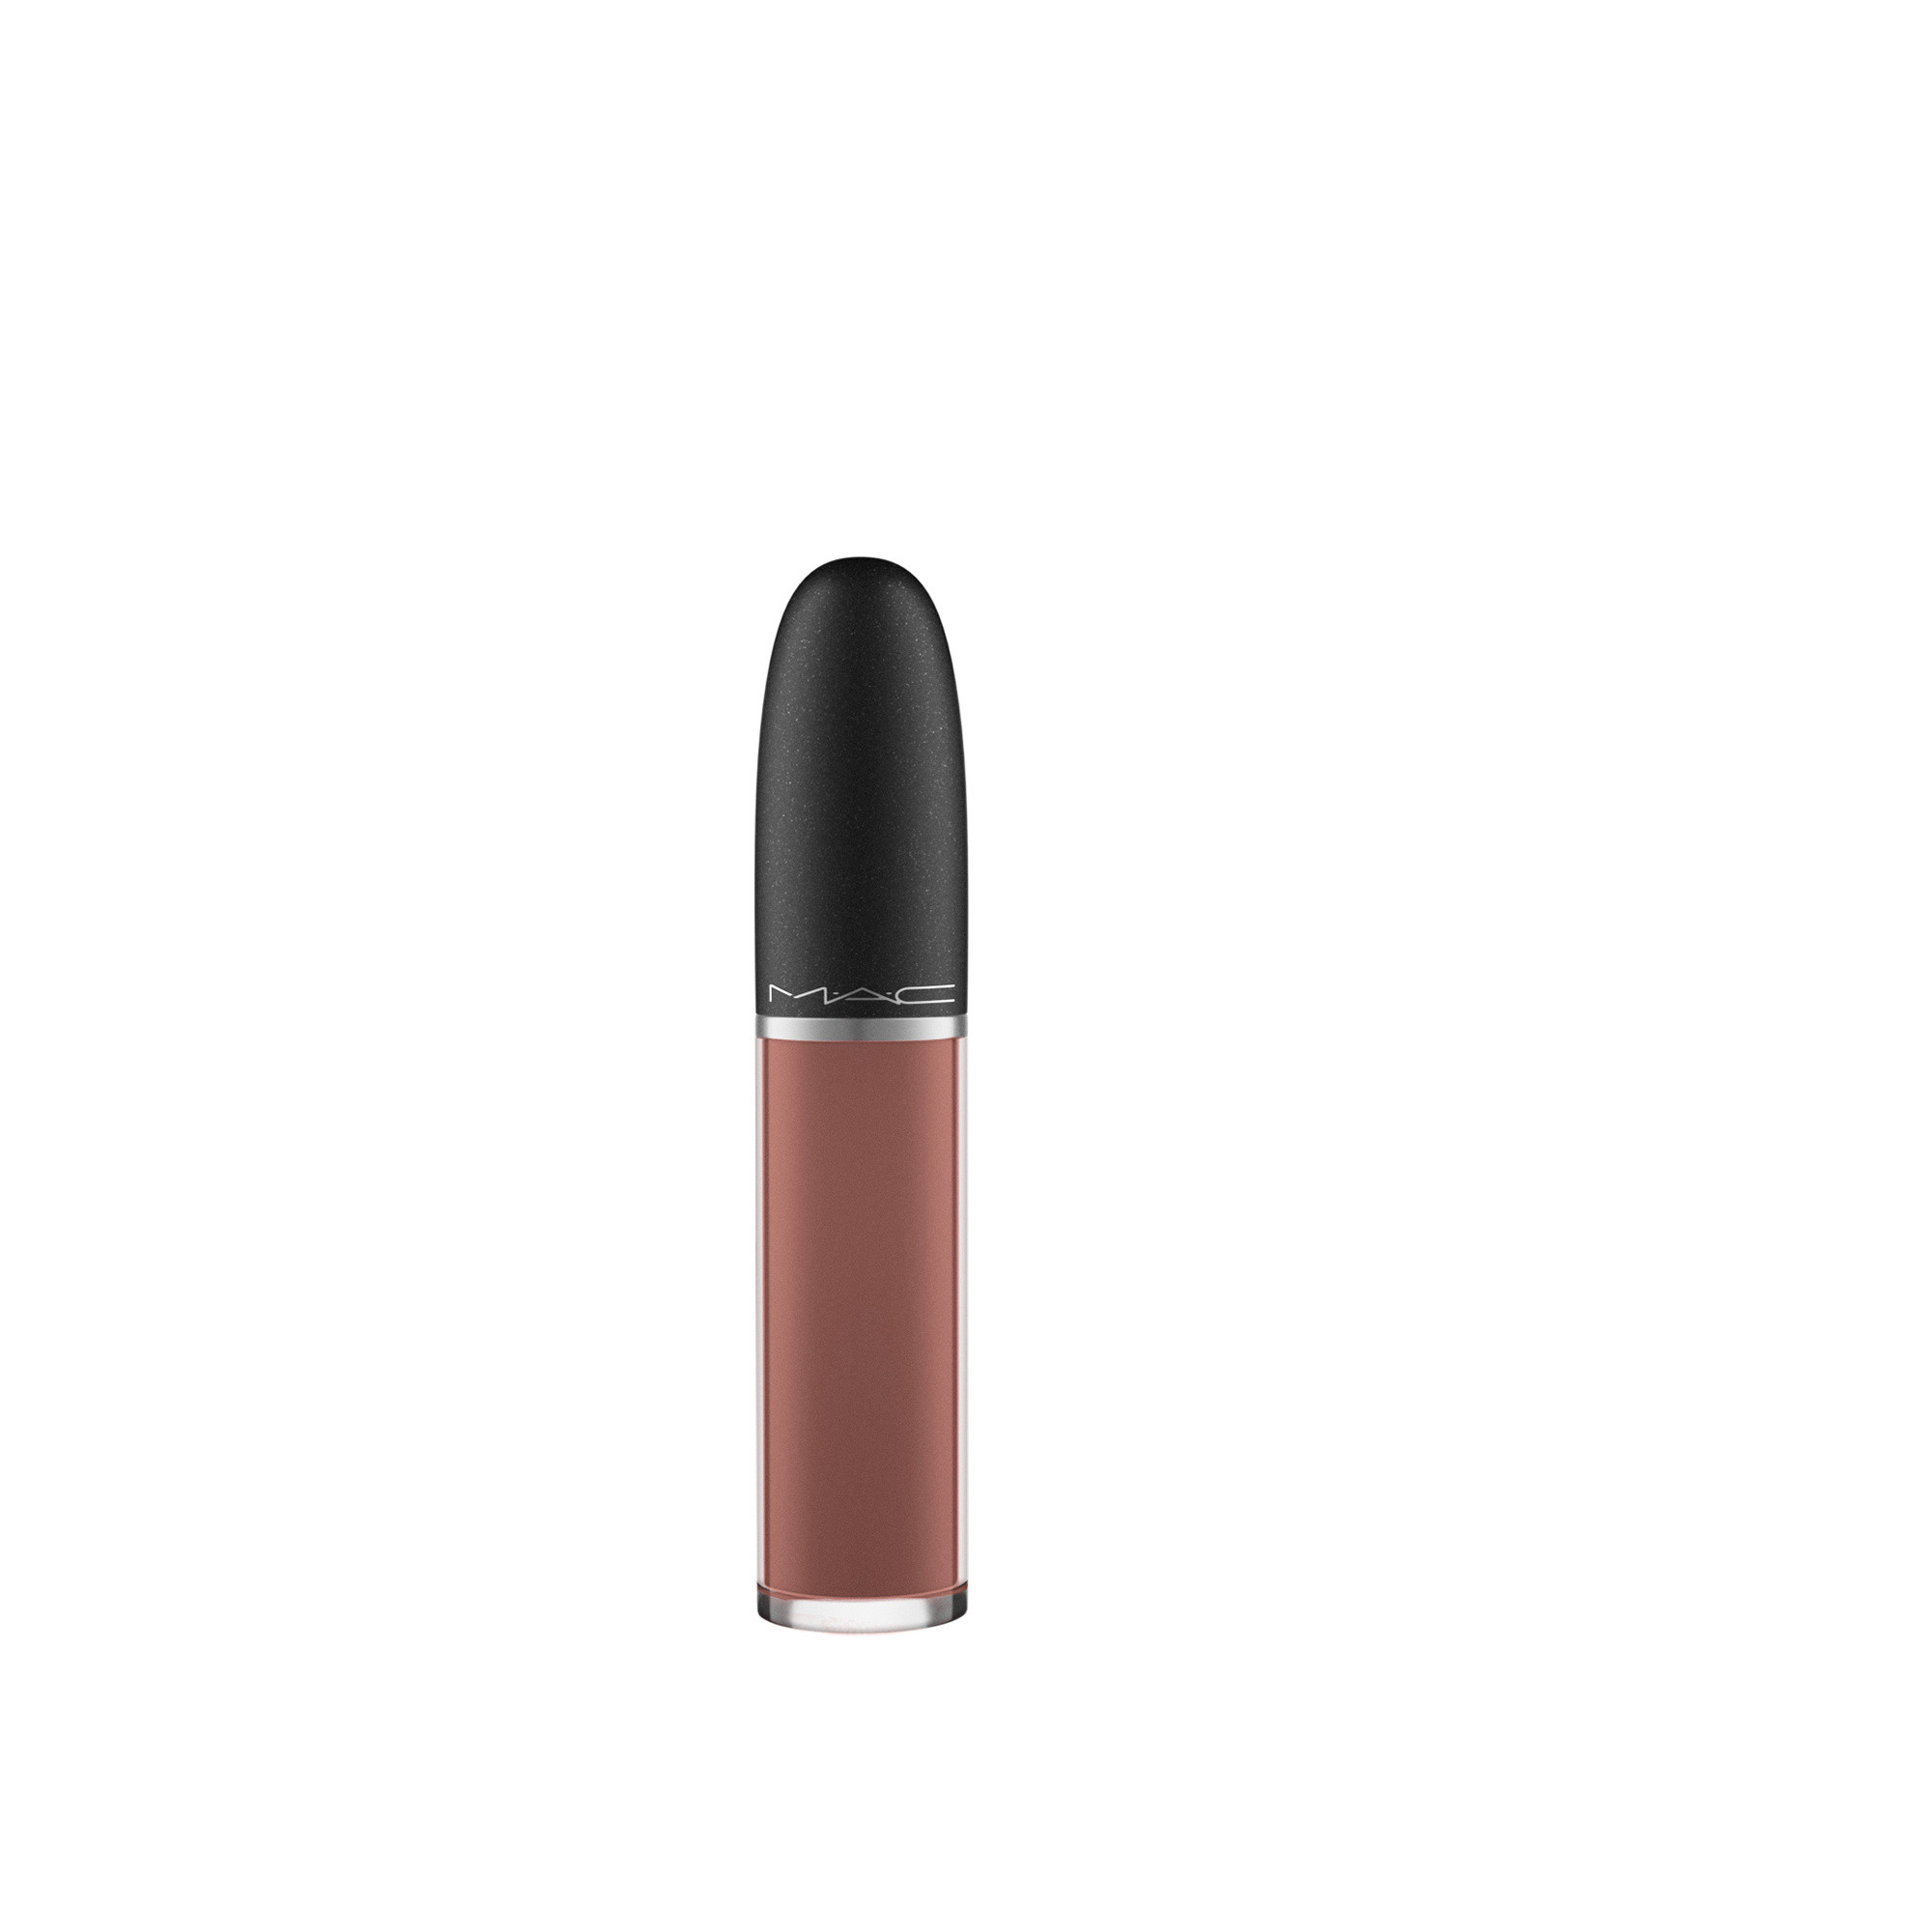 Retro Matte Liquid Lip Colour - Topped With Brandy, TOPPED WITH BRANDY, large image number 1